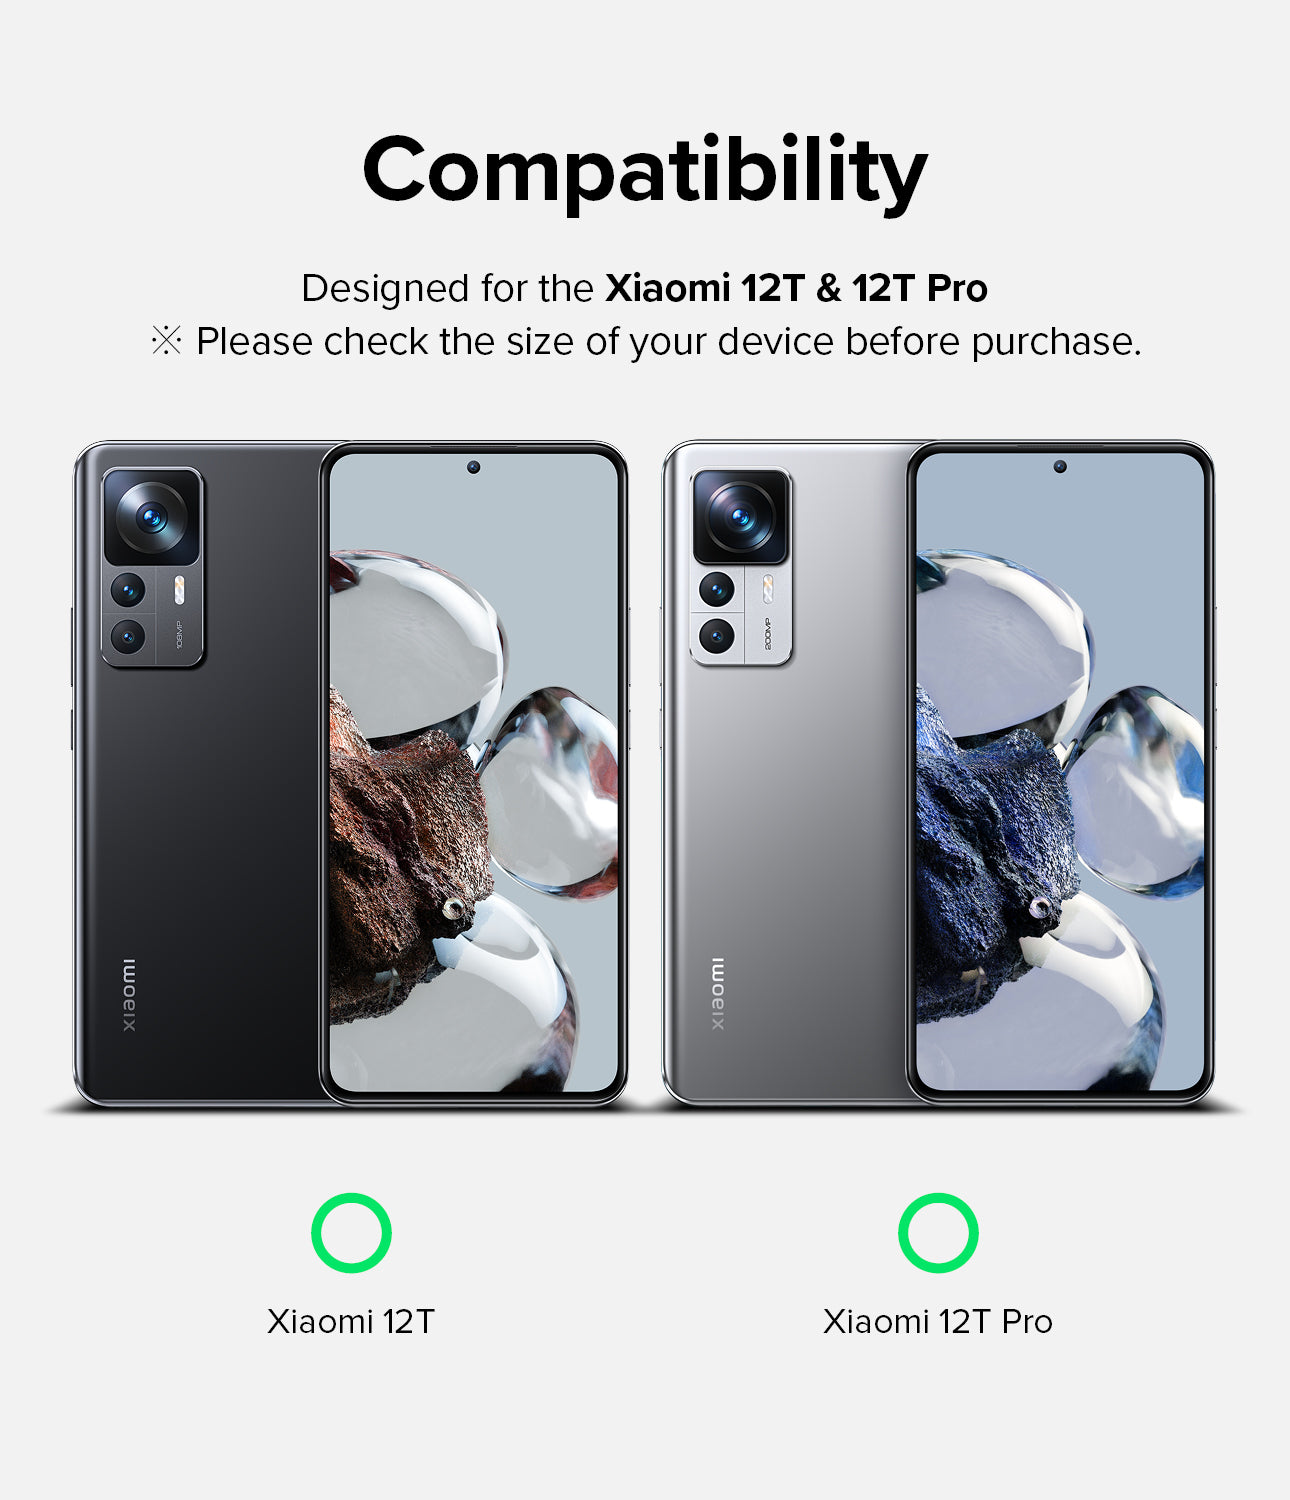 Compatibility - Designed for the Xiaomi 12T & 12T Pro * Please check the size of your device before purchase.